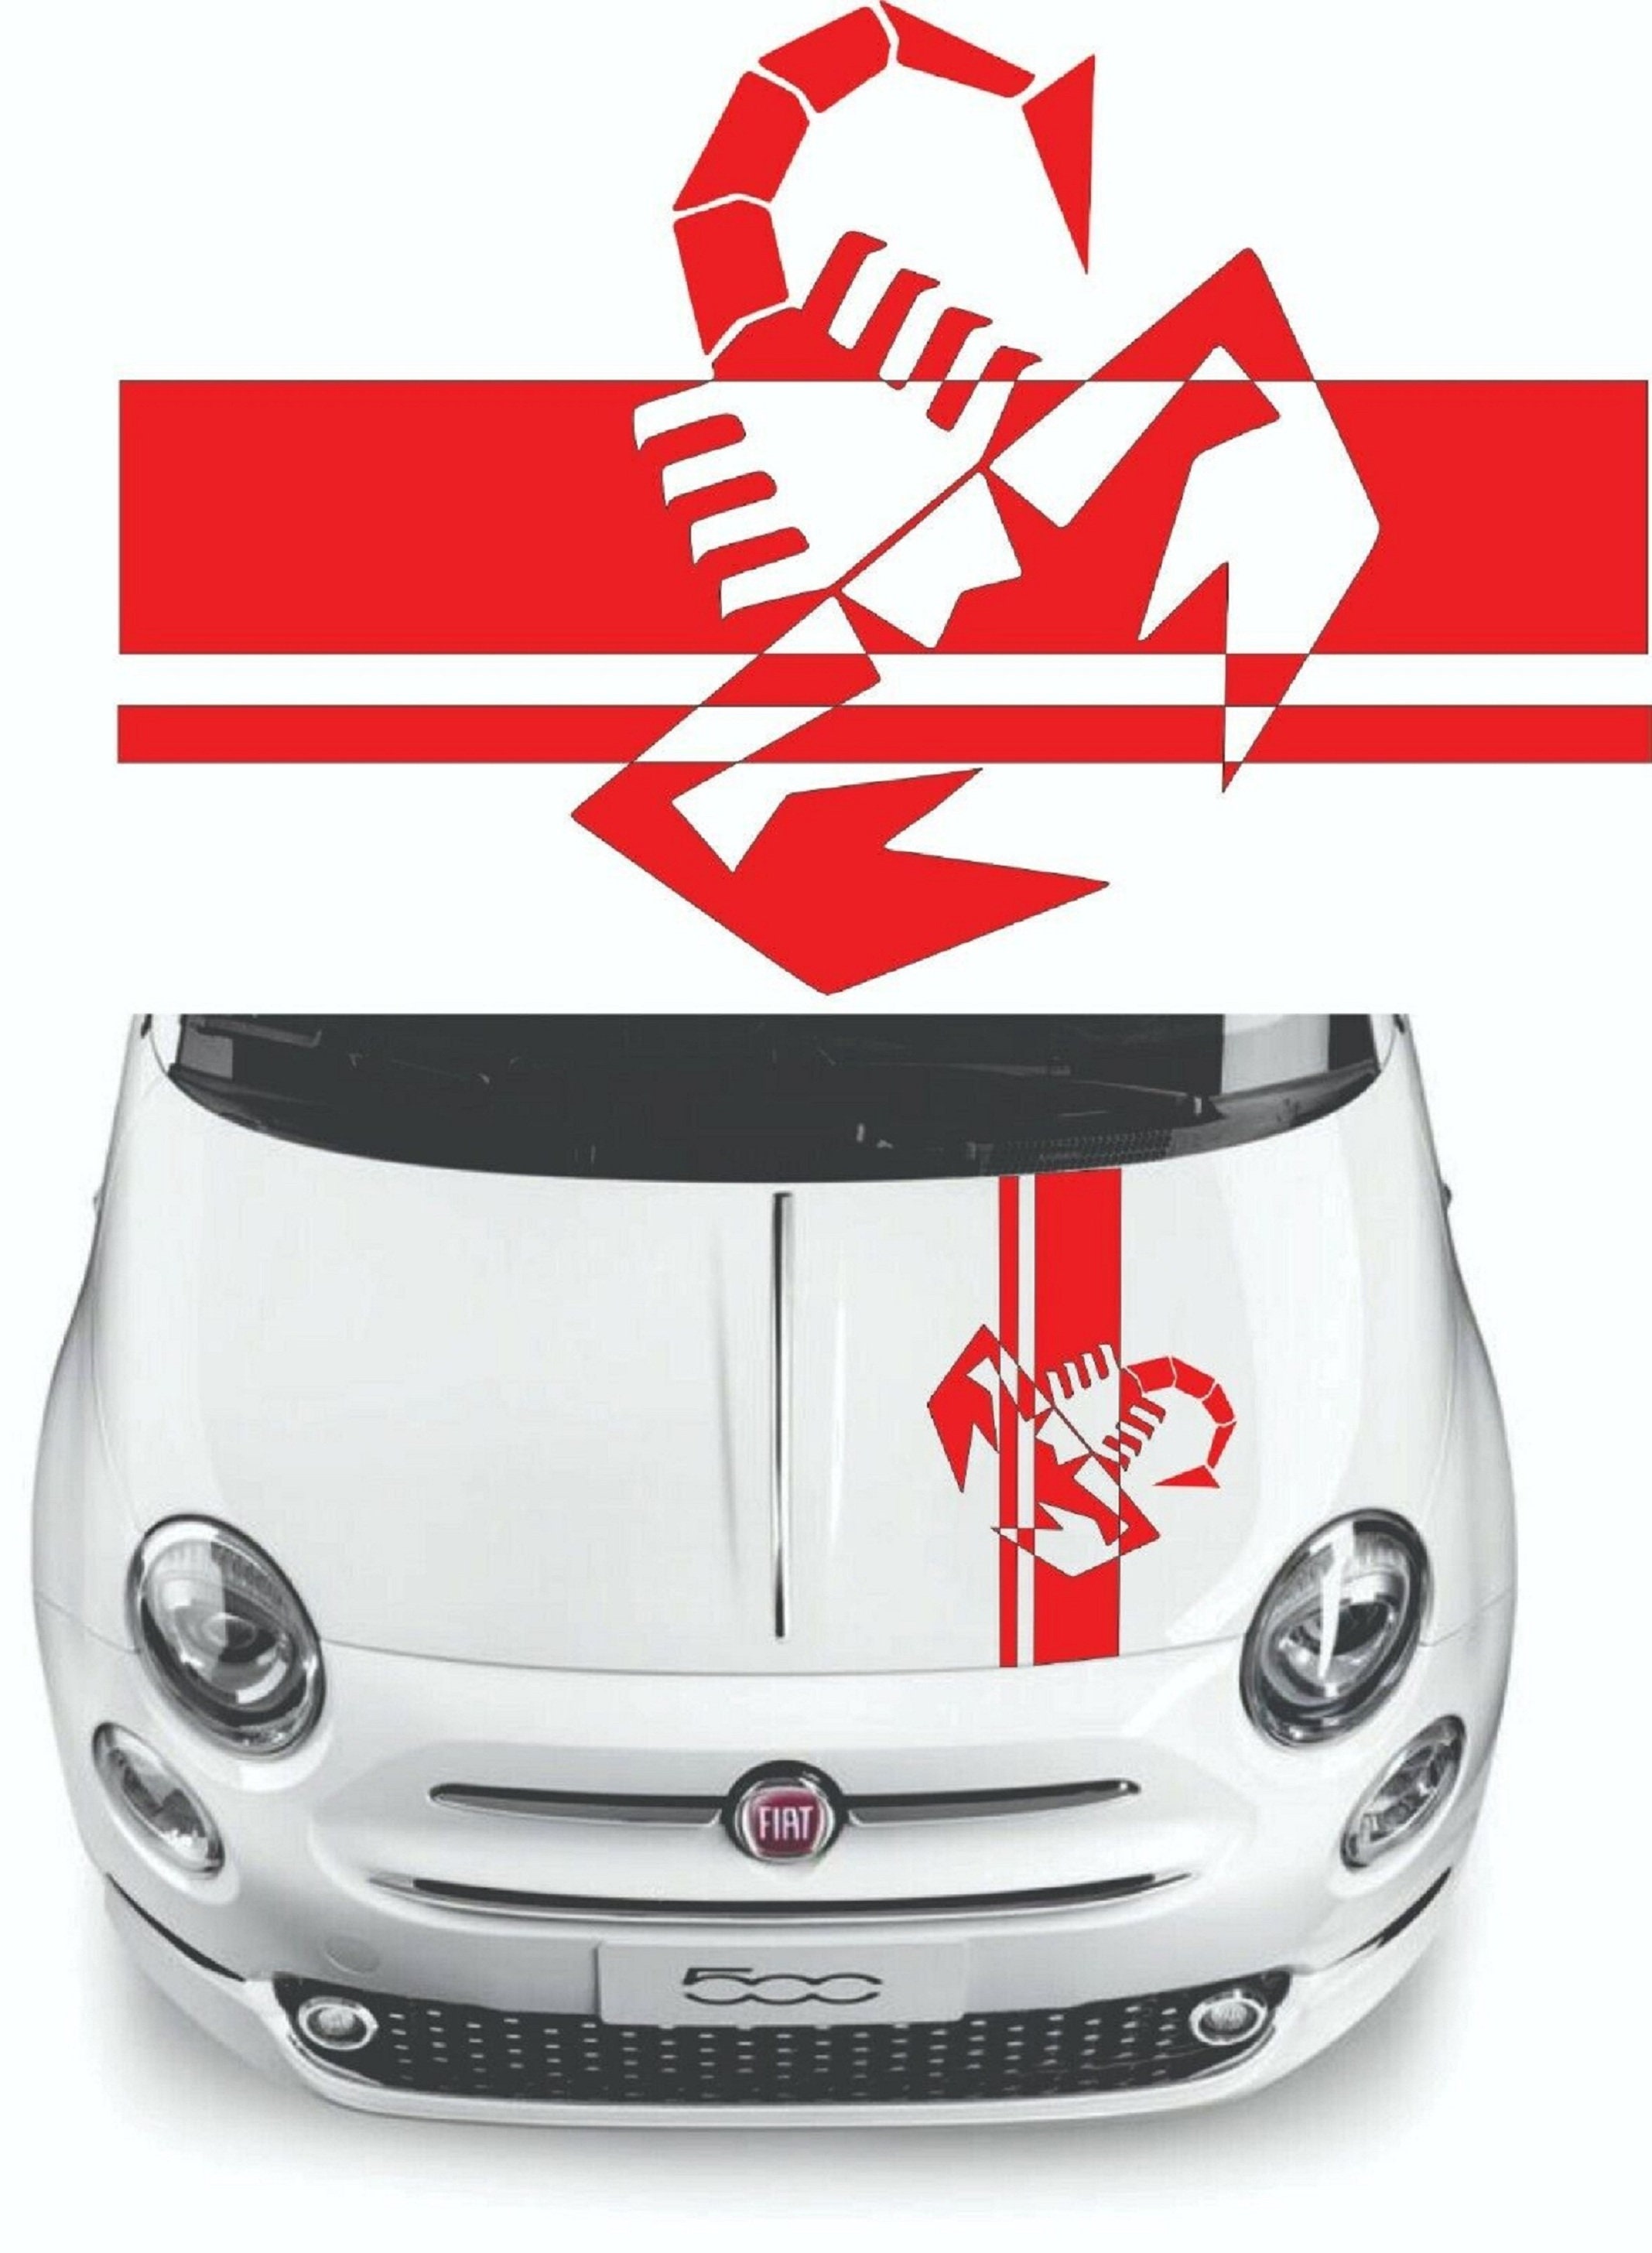 Switching bag for Fiat 500 Abarth 07 + leather Italian 500 logo + frame